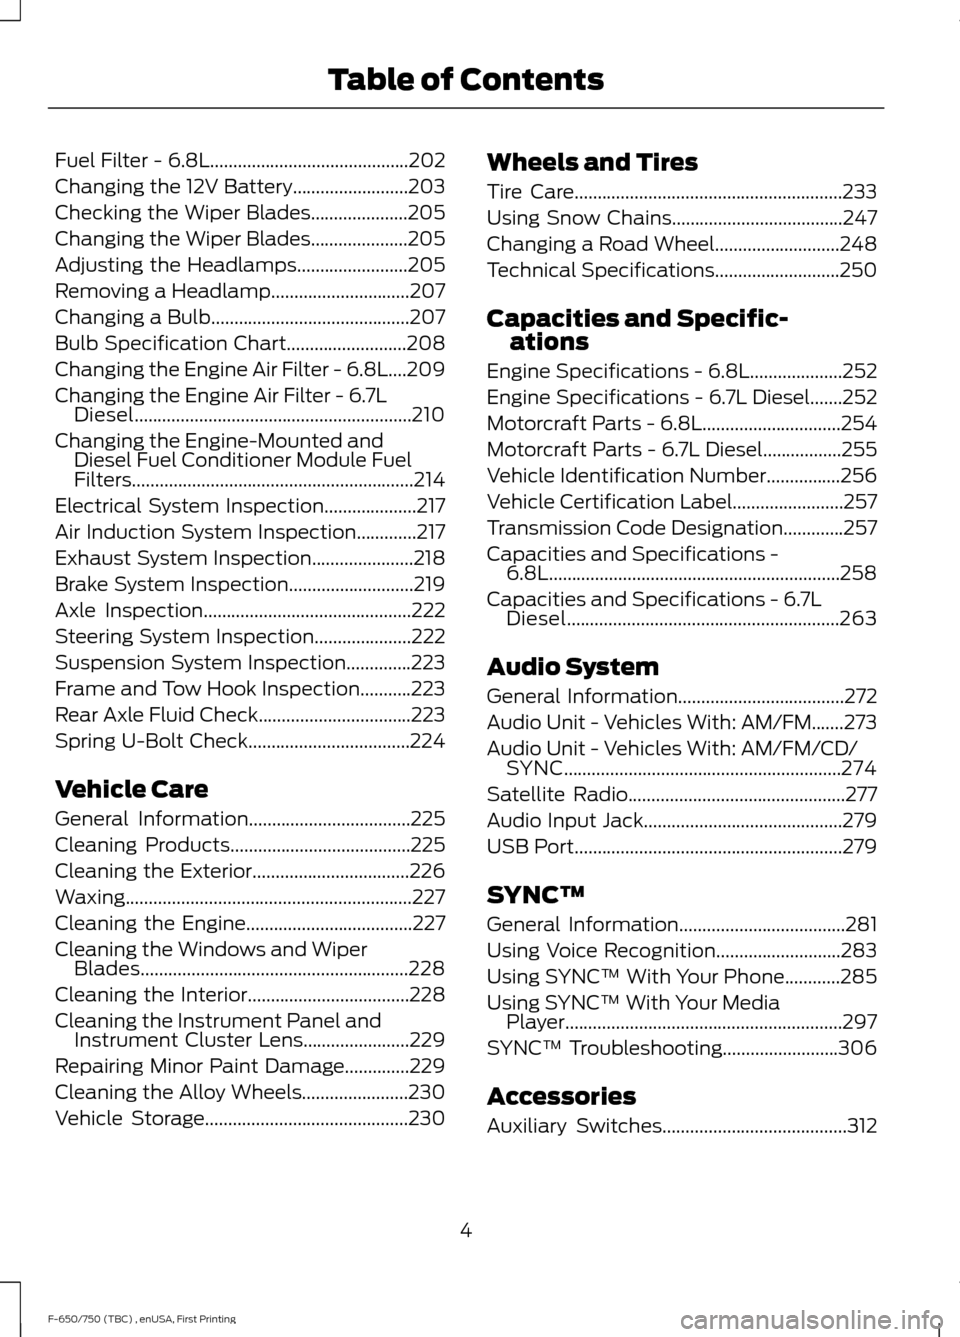 FORD F650 2017 13.G Owners Manual Fuel Filter - 6.8L...........................................202
Changing the 12V Battery.........................203
Checking the Wiper Blades.....................205
Changing the Wiper Blades.......